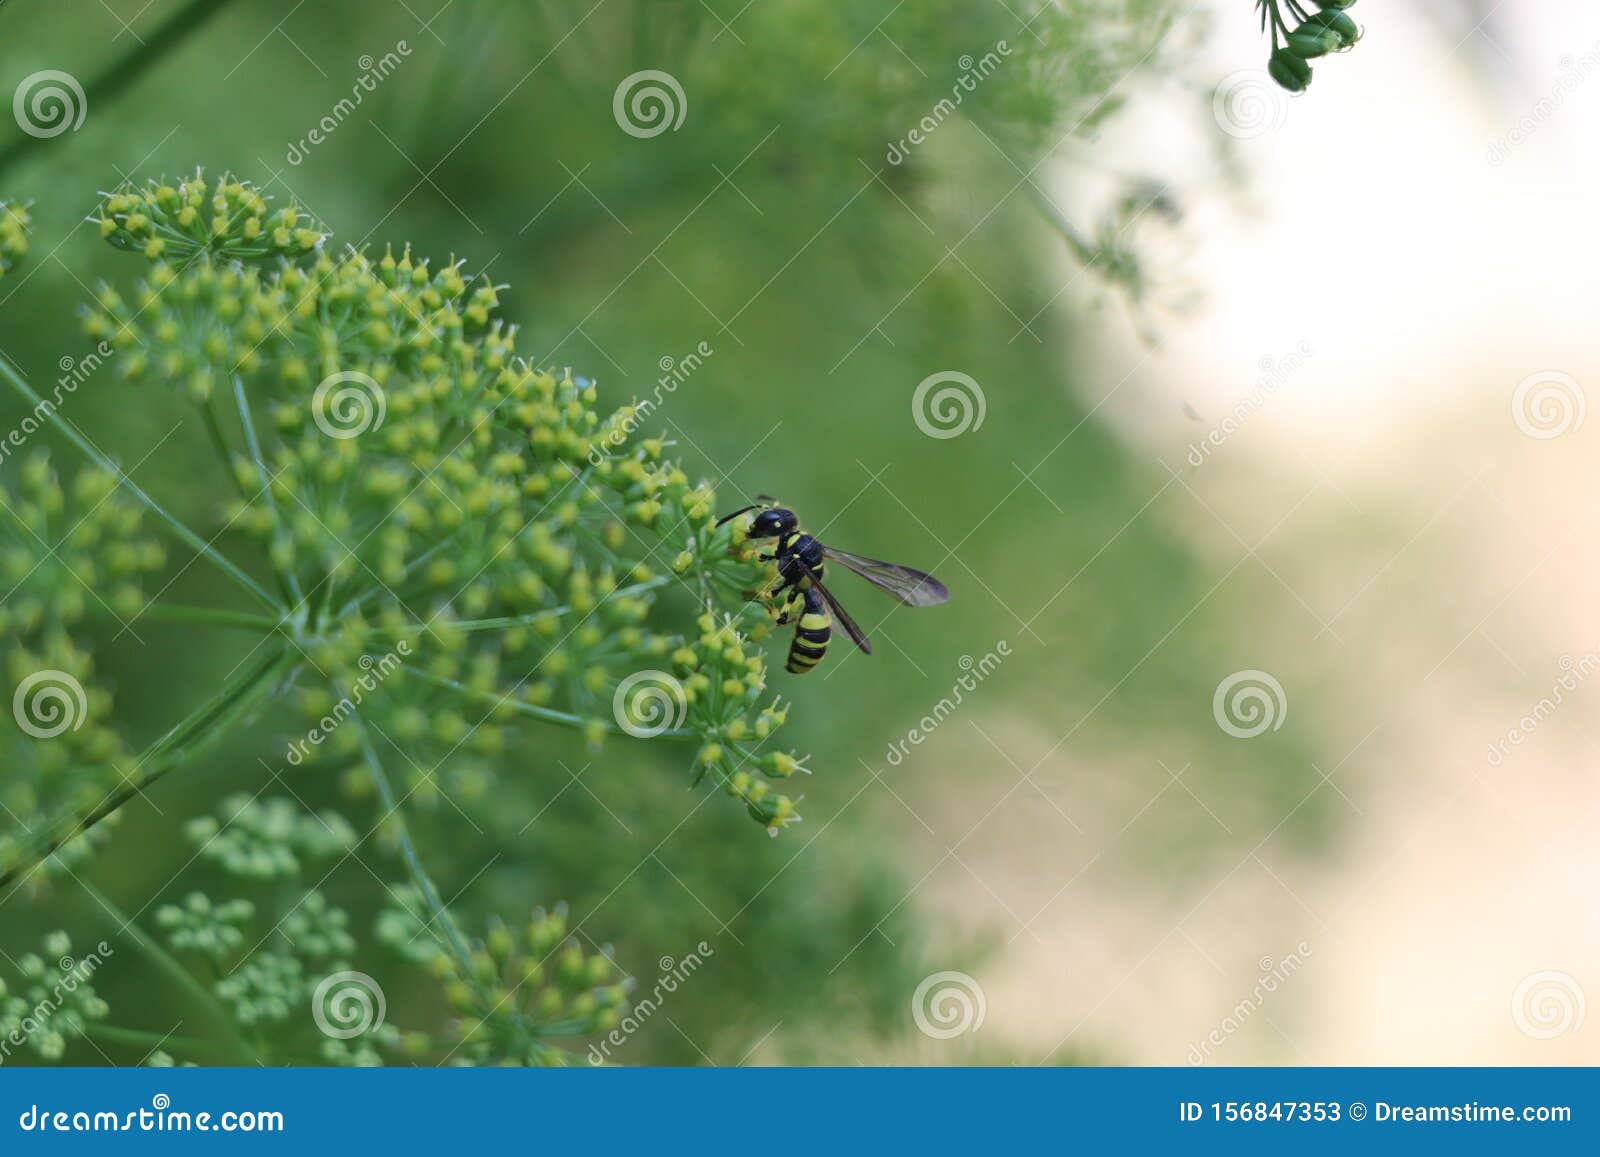 wasp green insect nature animal plant